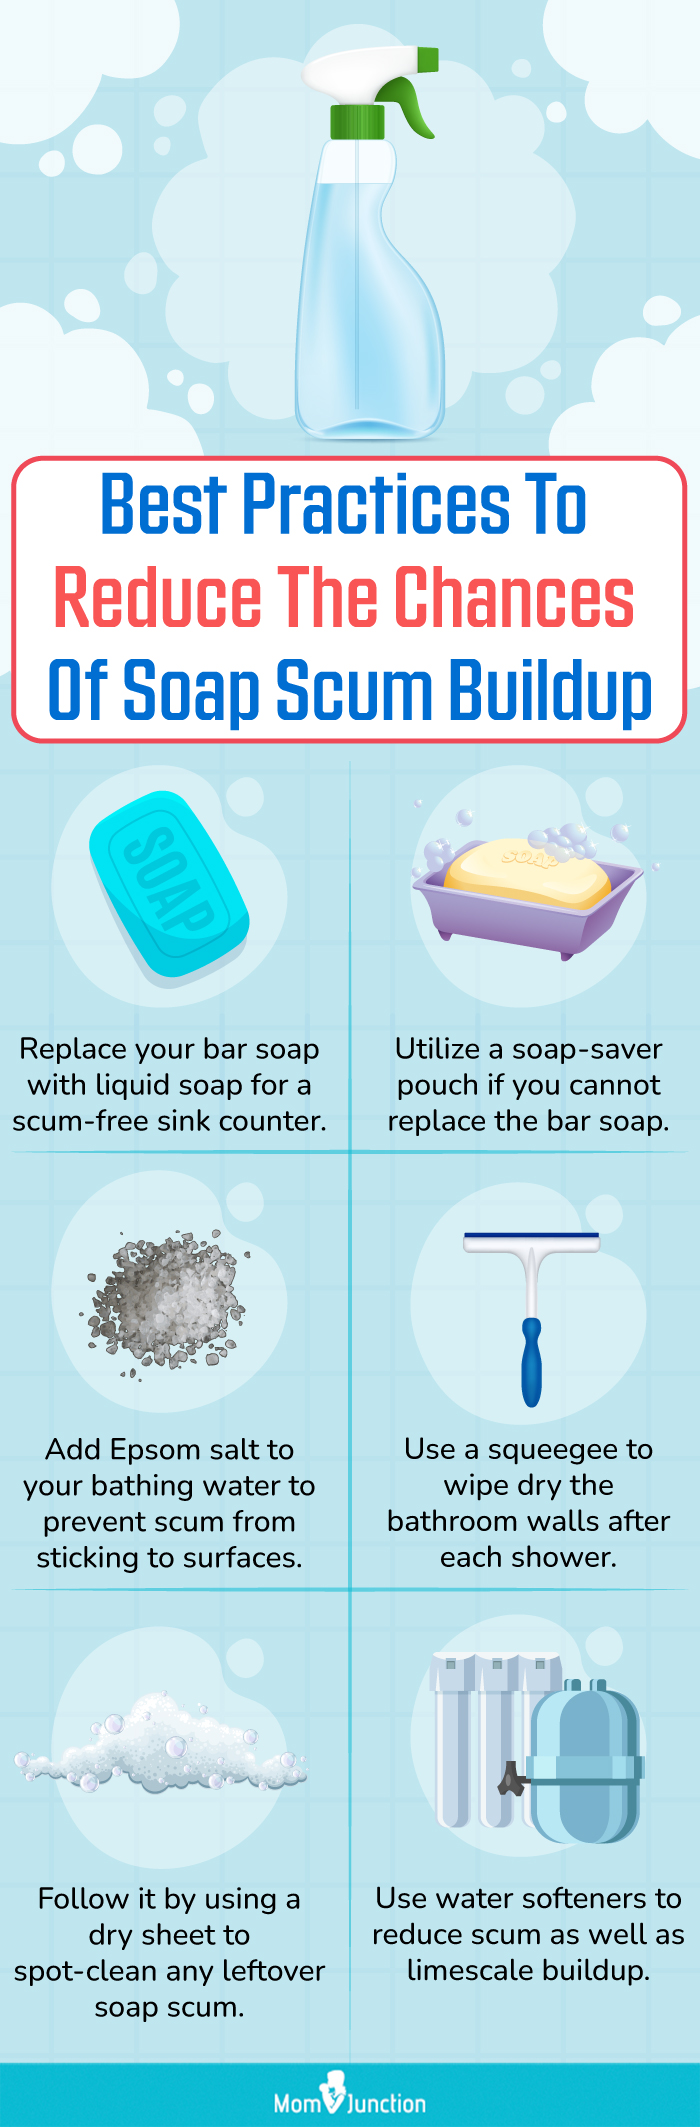 Best Practices To Reduce The Chances Of Soap Scum Buildup (infographic)